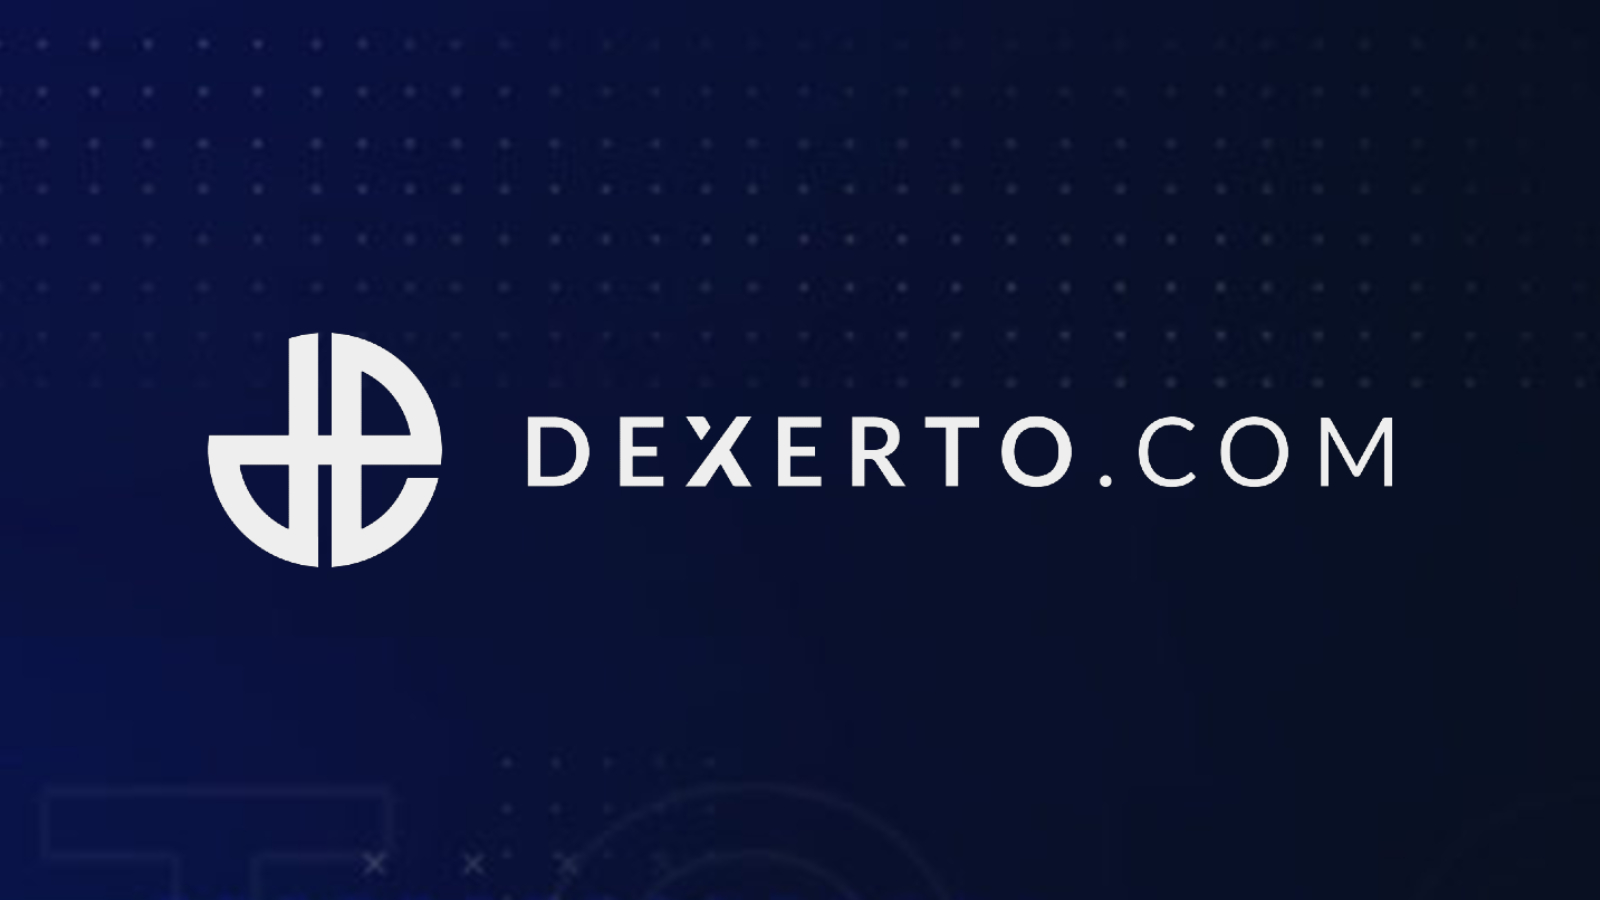 Evil Geniuses Valorant player claims he got death threats after beating NRG - Dexerto